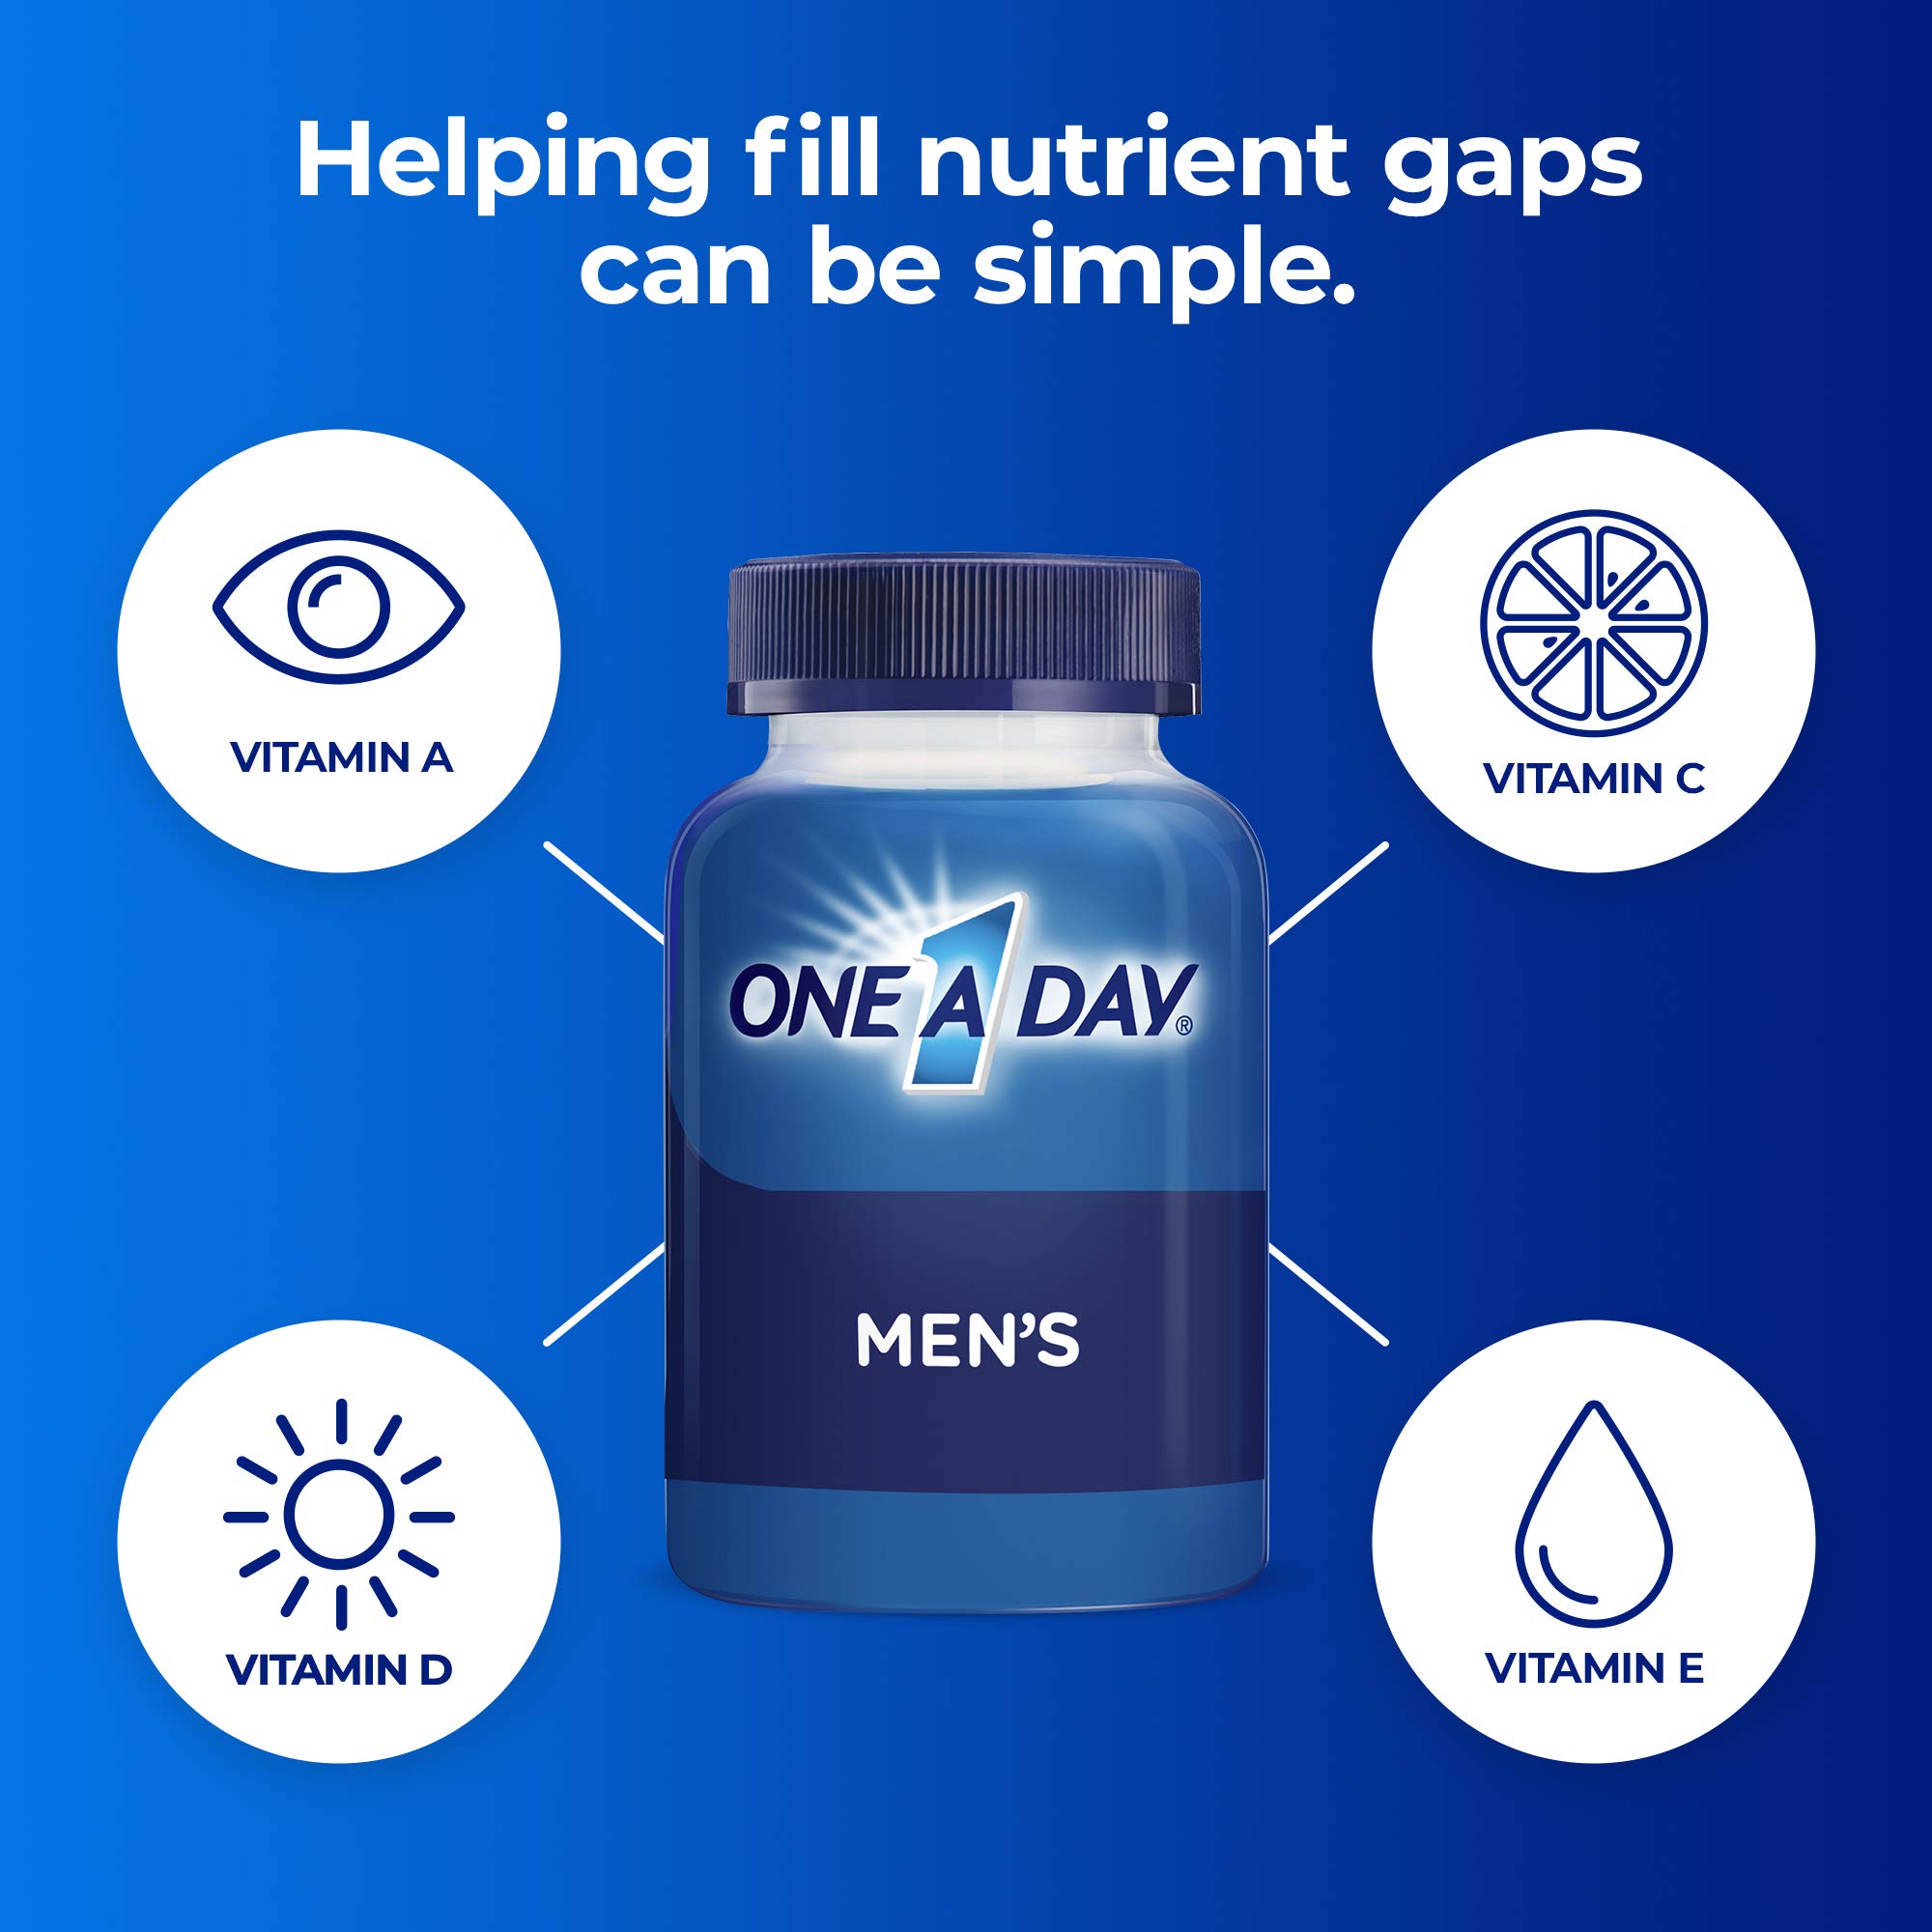 One A Day Men’s Multivitamin, Supplement Tablet with Vitamin A, Vitamin C, Vitamin D, Vitamin E and Zinc for Immune Health Support, B12, Calcium & more, 200 count